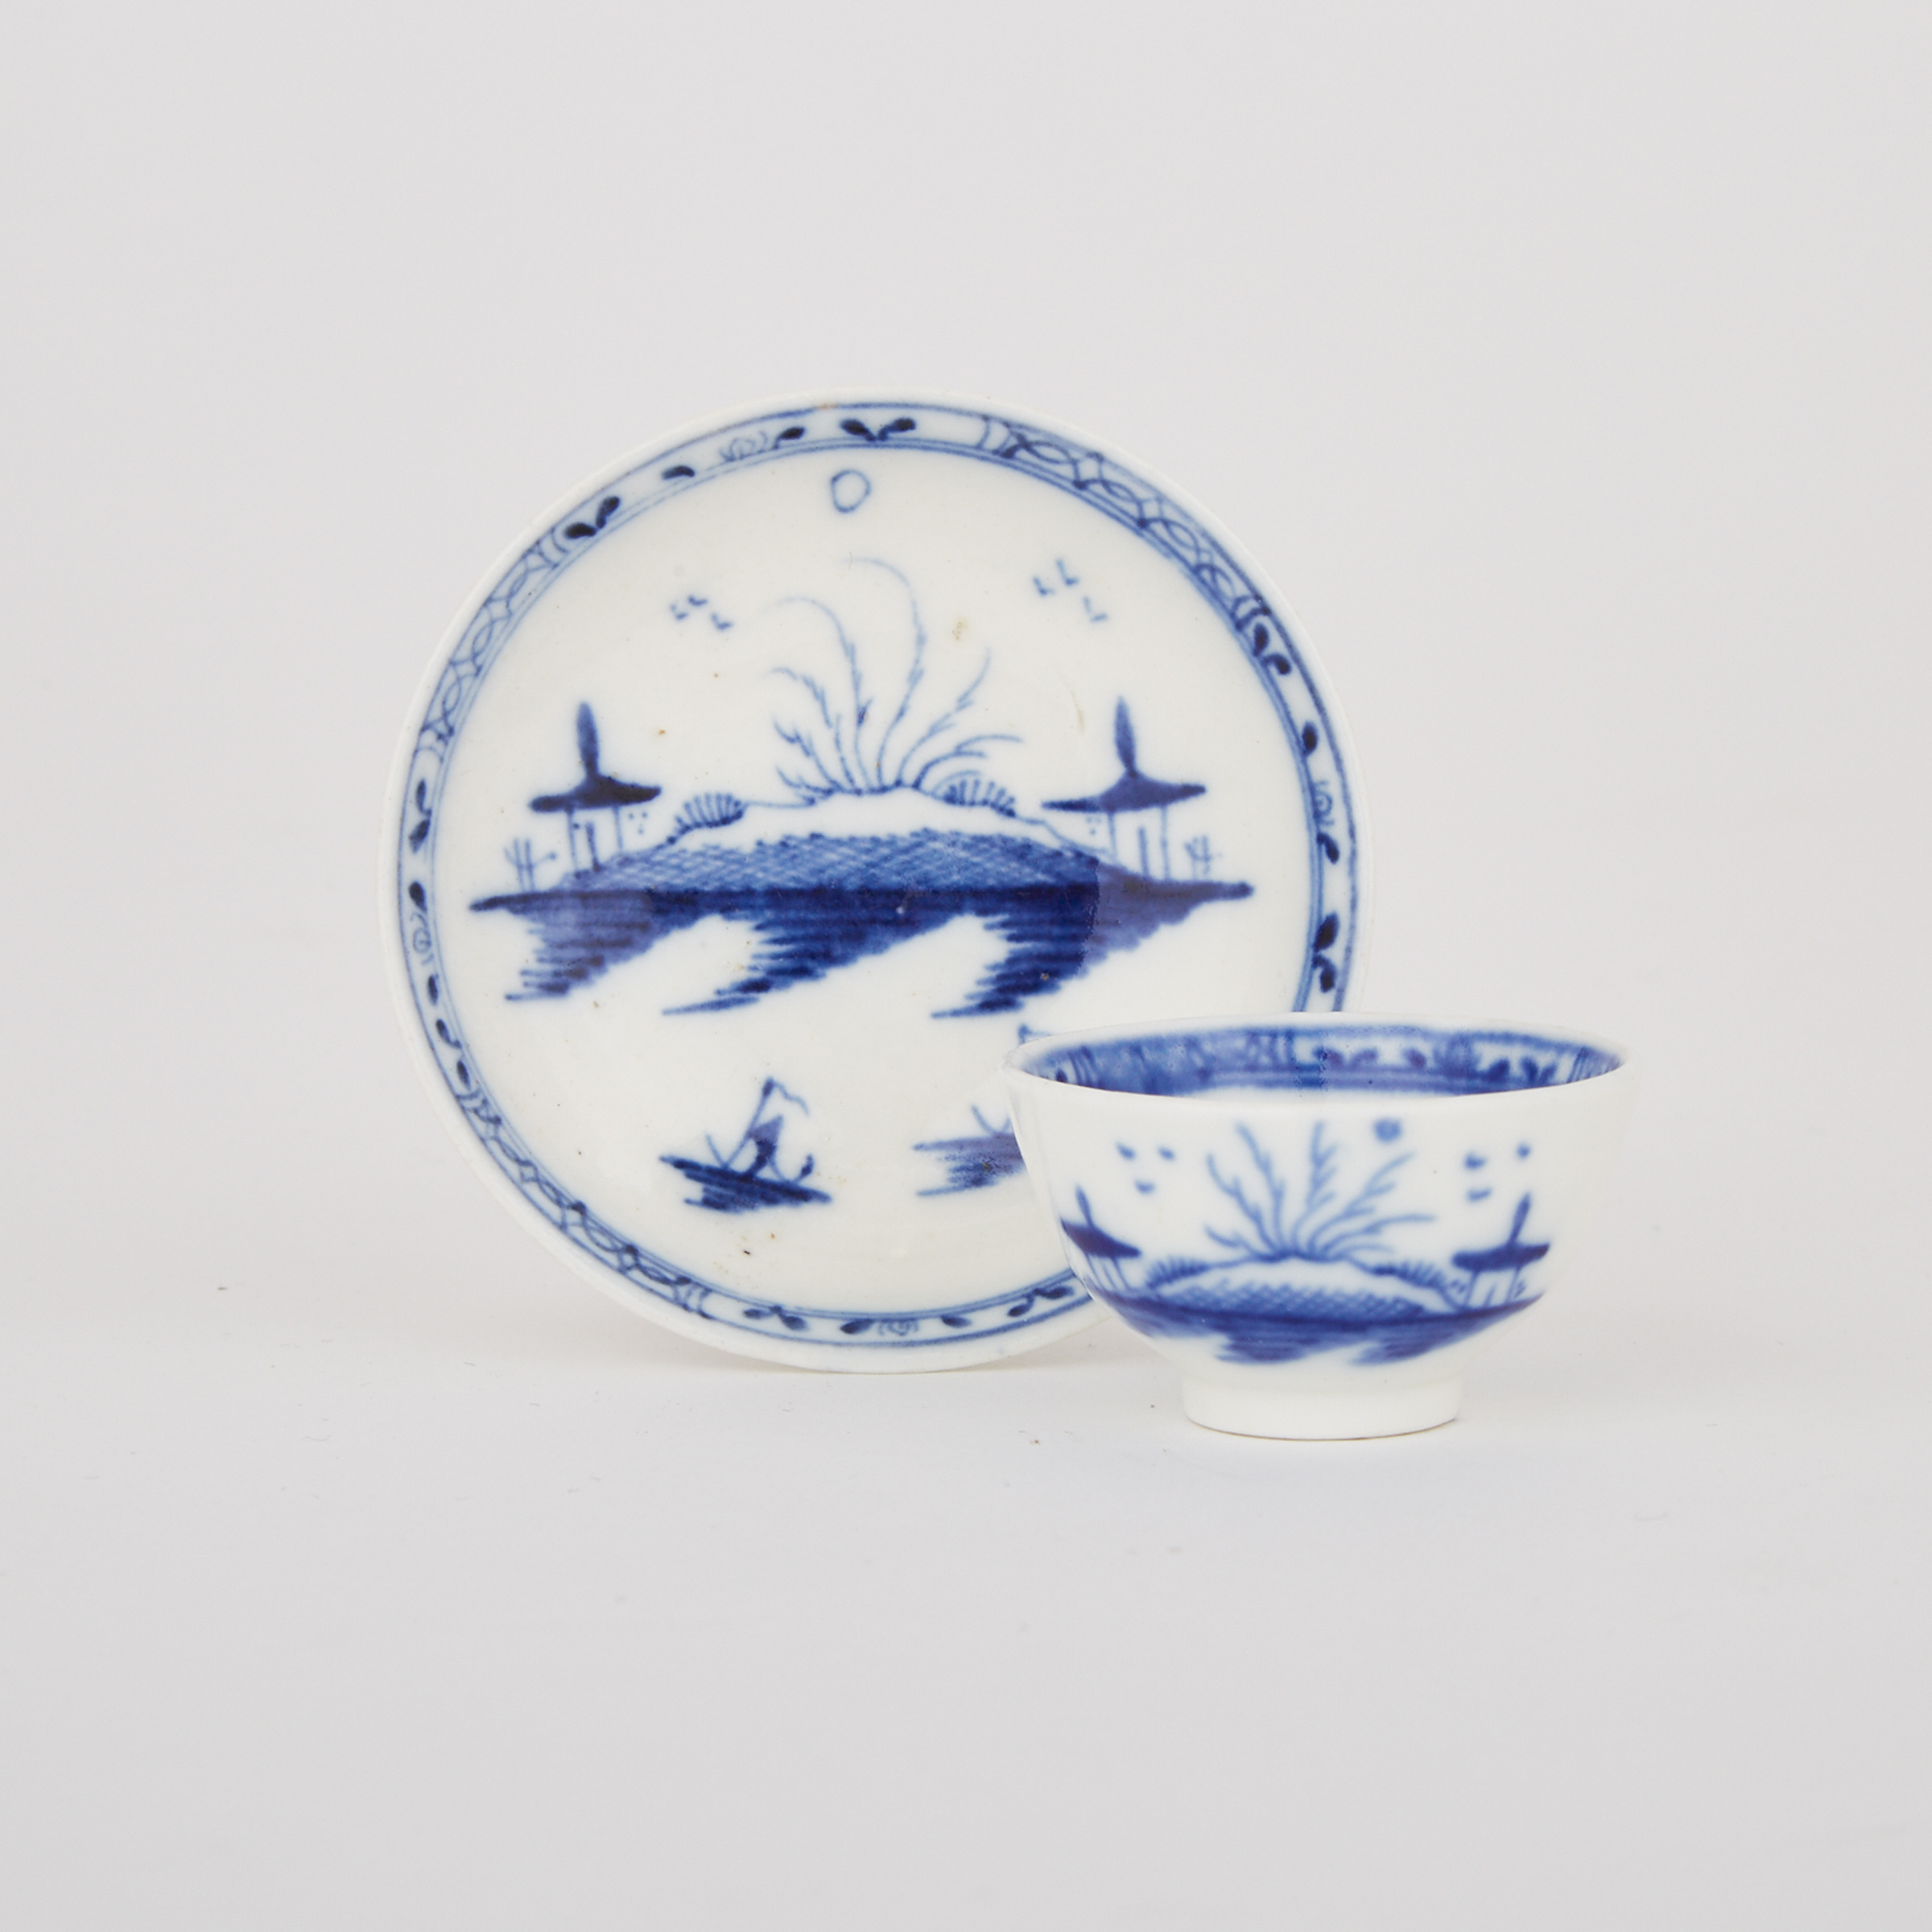 Caughley Miniature ‘Island’ Pattern Tea Bowl and Saucer, c.1770